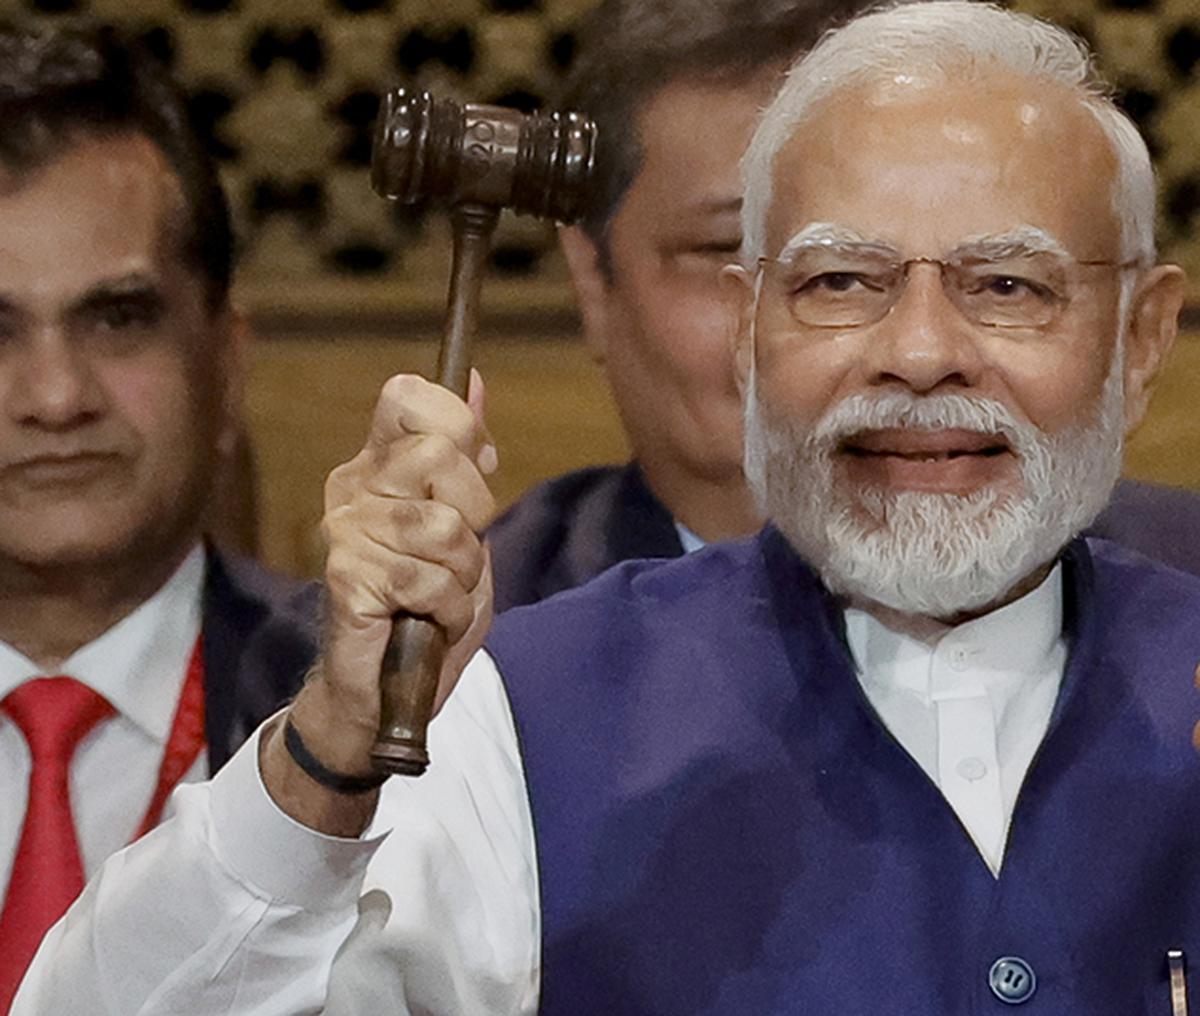 Prime Minister Narendra Modi holds the gavel during a G20 Presidency handover ceremony at the G20 Summit in Nusa Dua, Bali, Indonesia on November 16, 2022. 